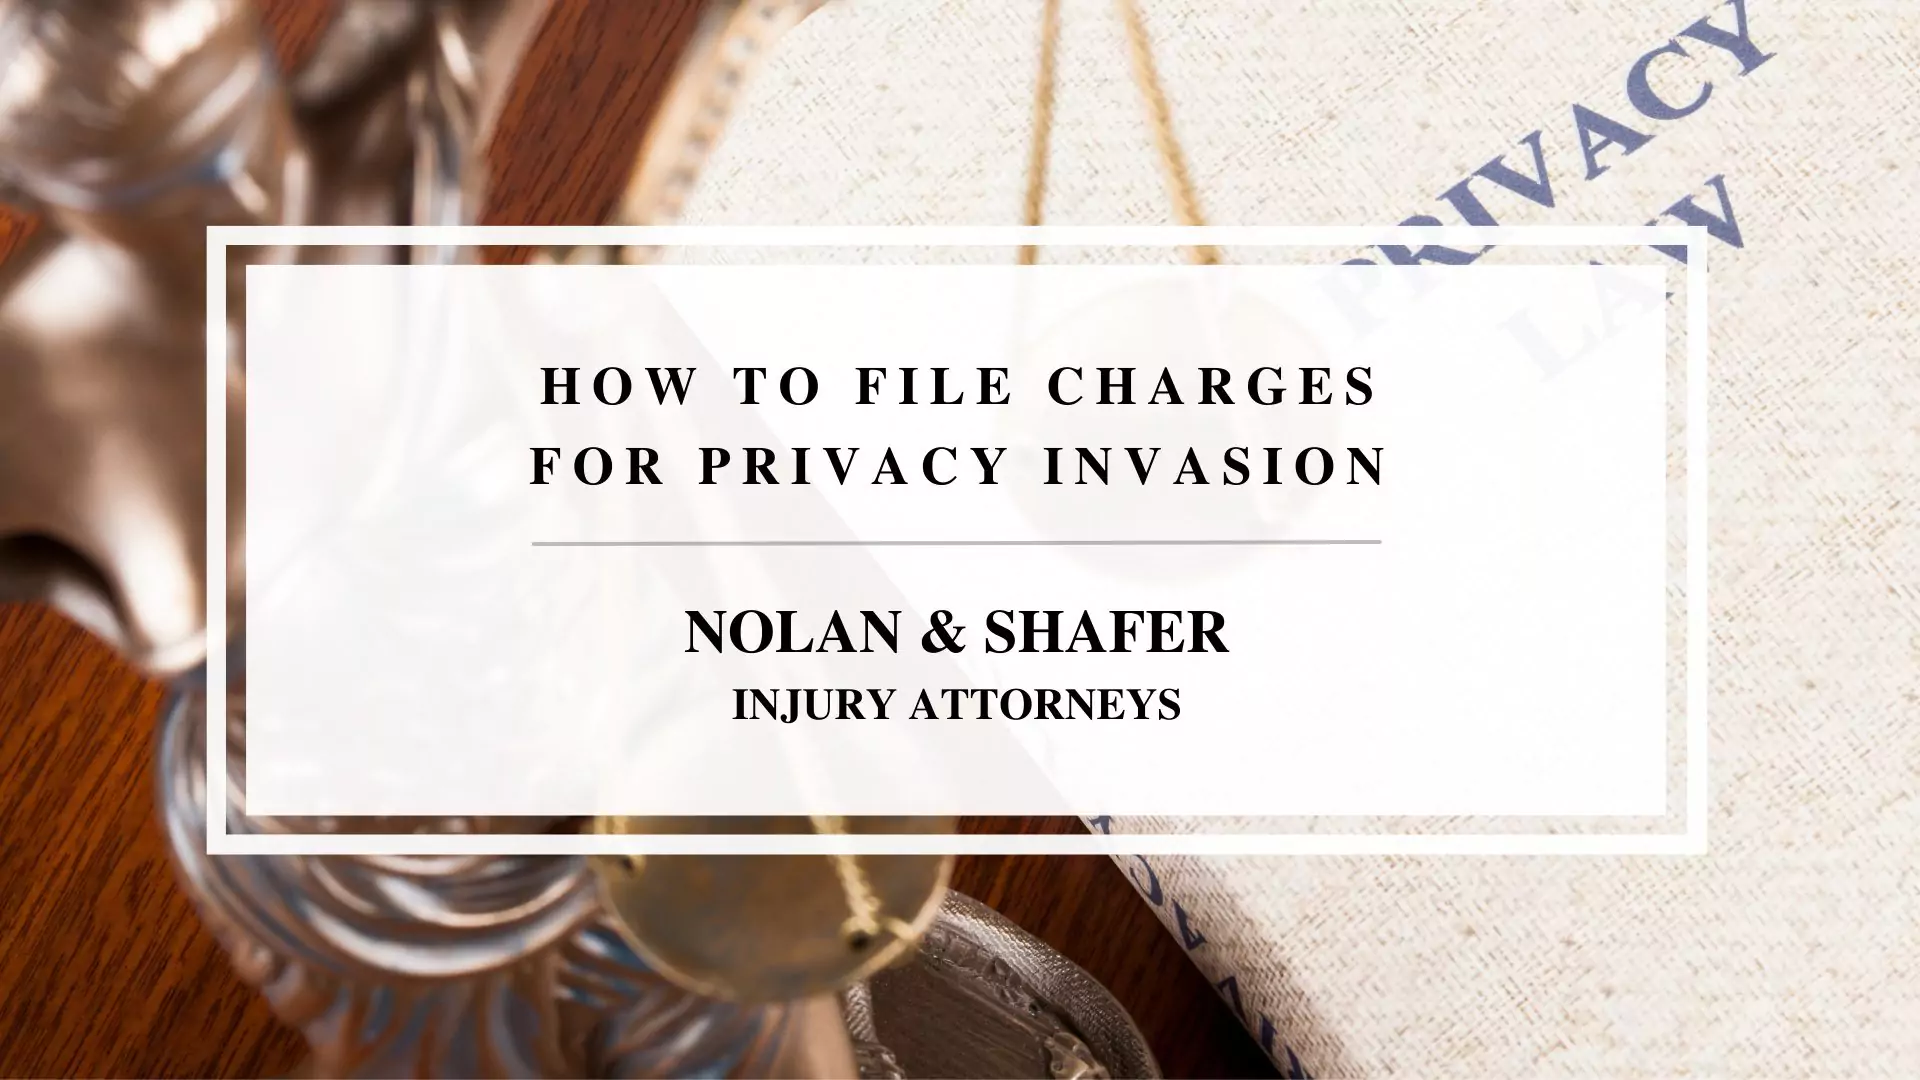 Featured image of how to file charges for privacy invasion